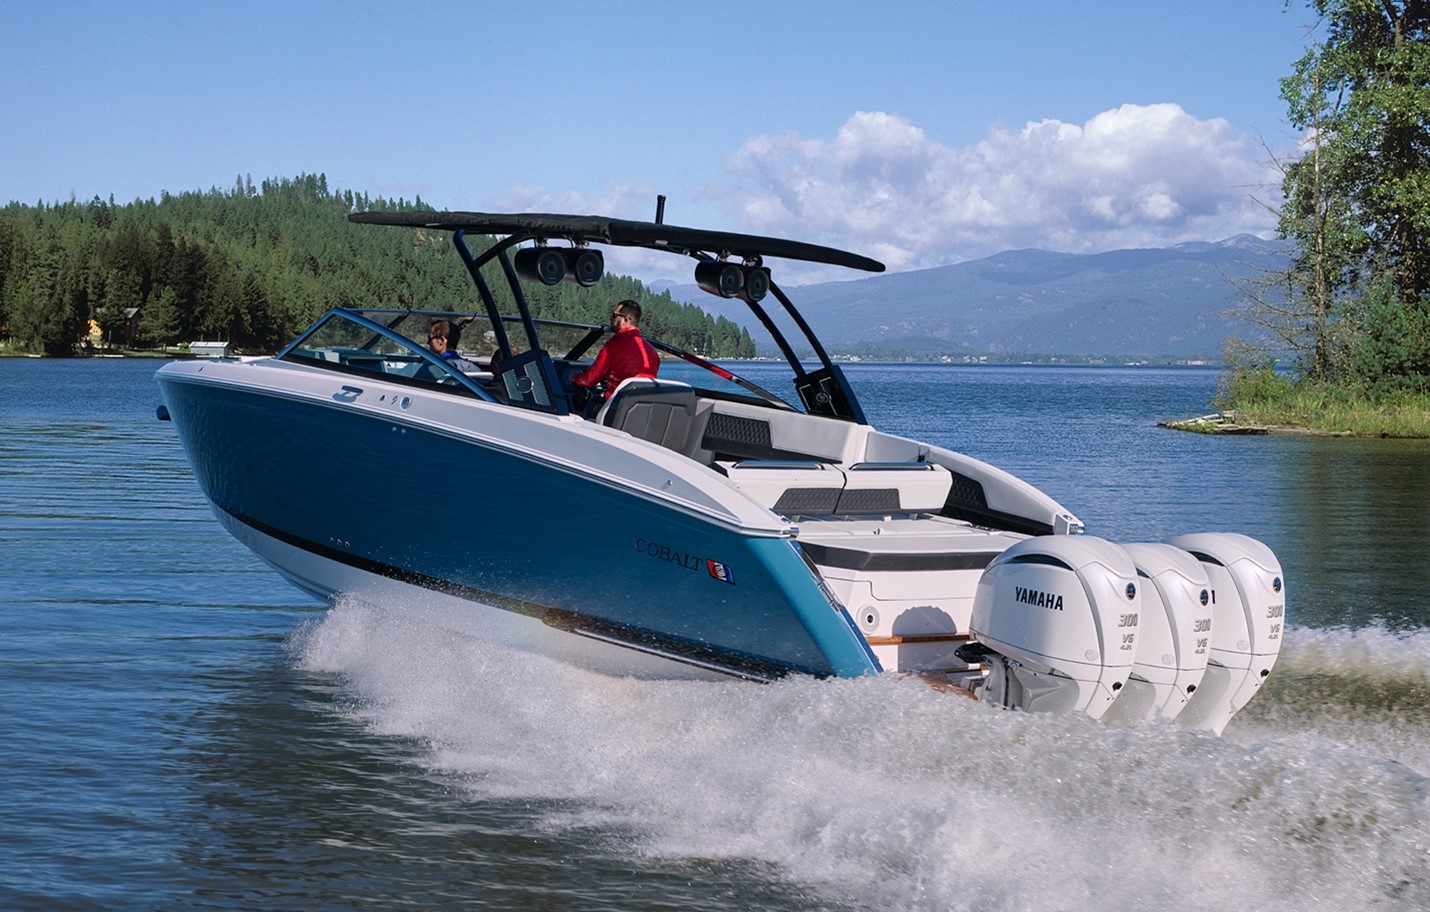 Cobalt’s Newest Luxury Runabout: The R33 Outboard